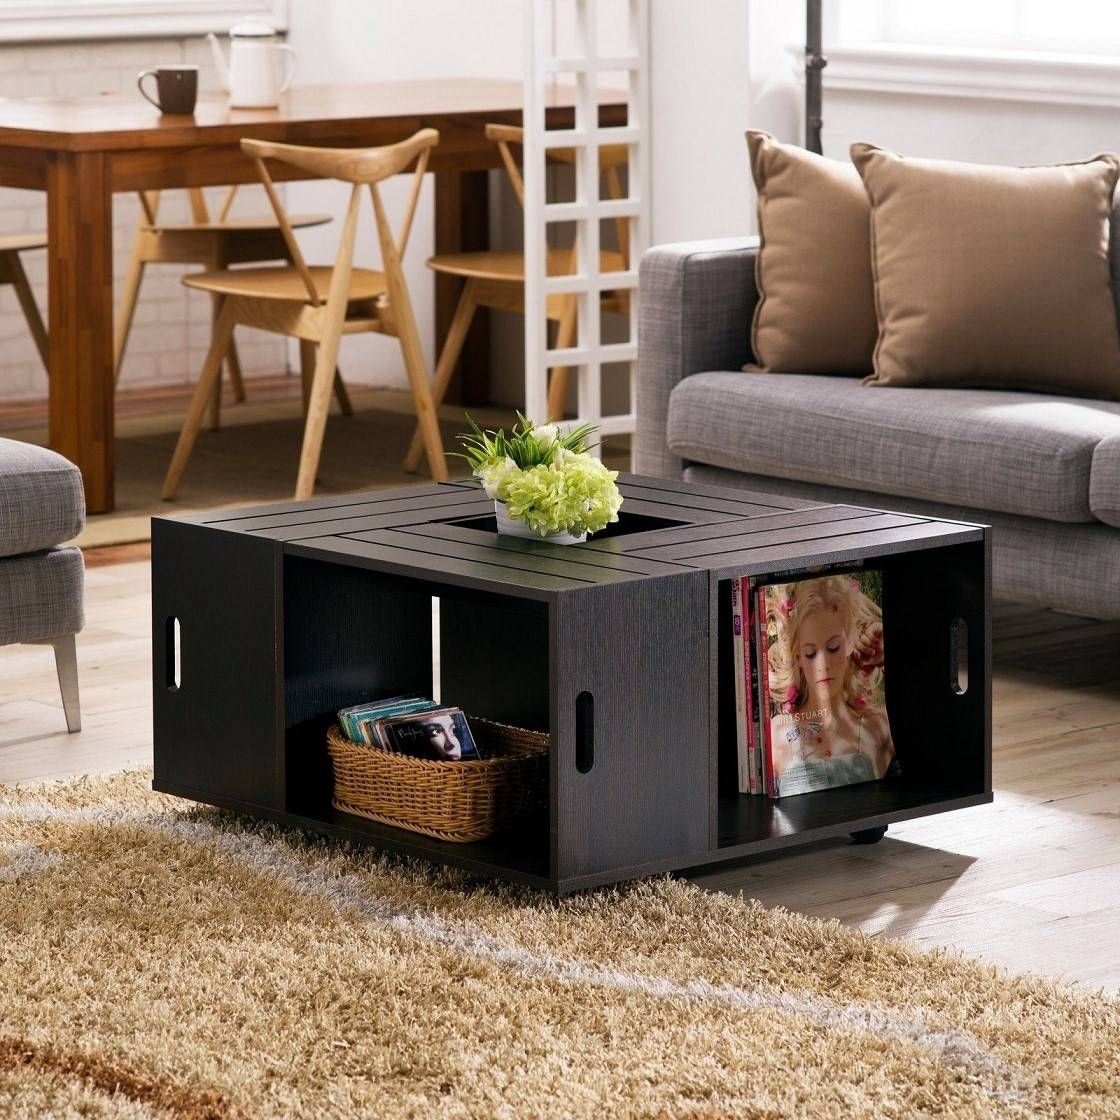 Cool Coffee Tables On Modern Coffee Table And Trend Small Coffee Regarding Round Coffee Tables With Storage (View 21 of 30)